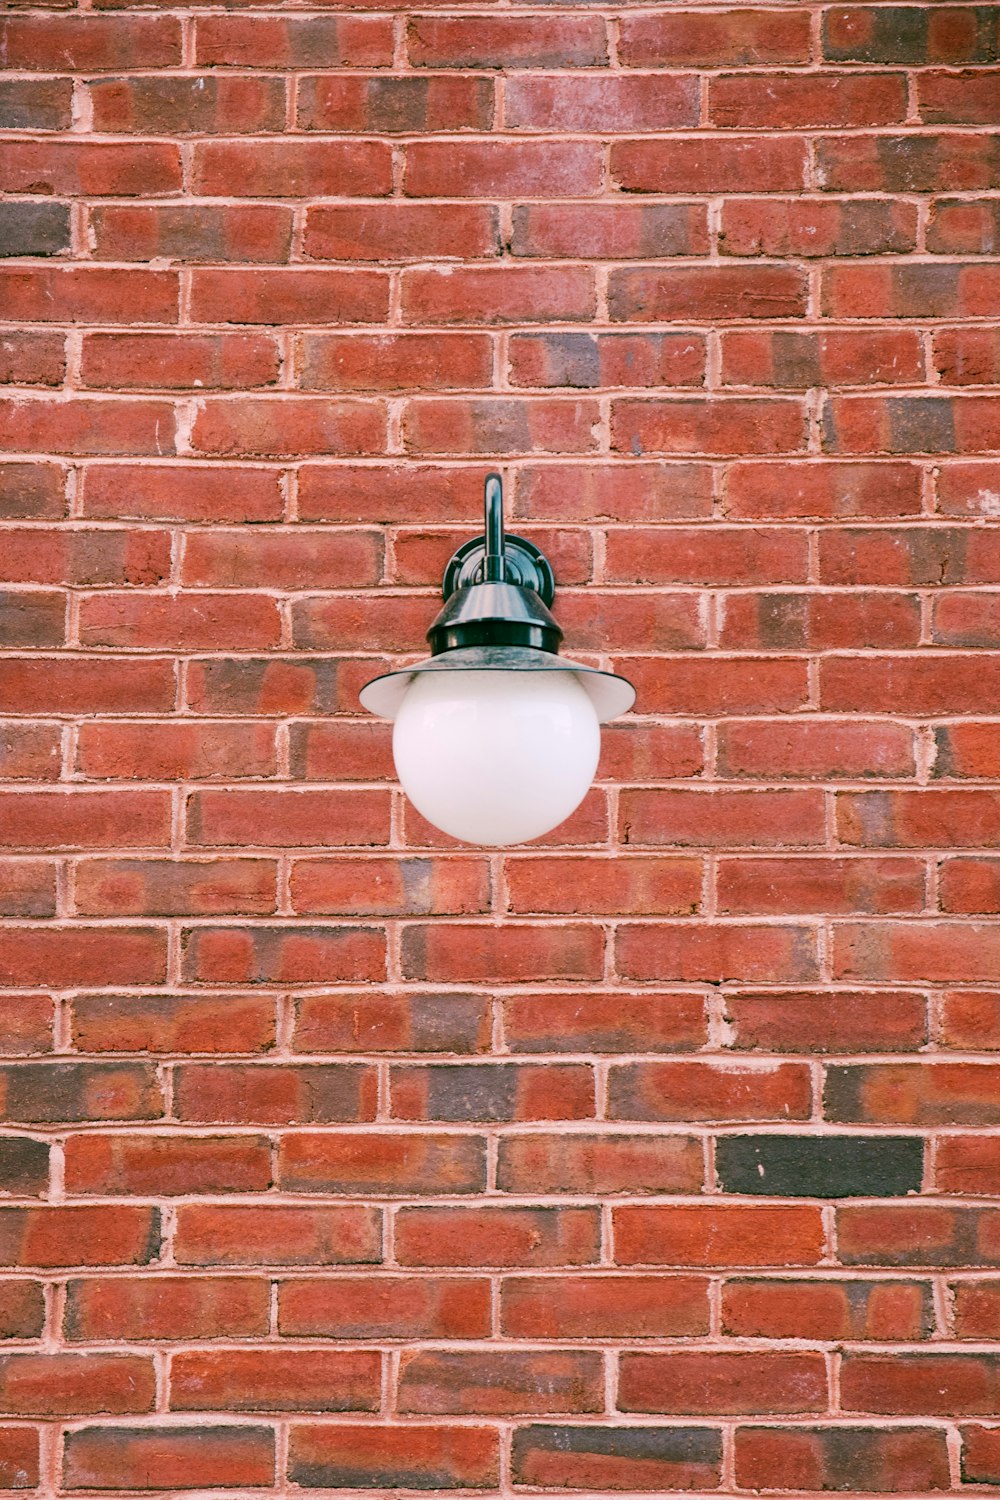 turned-off outdoor light on red bricked wall